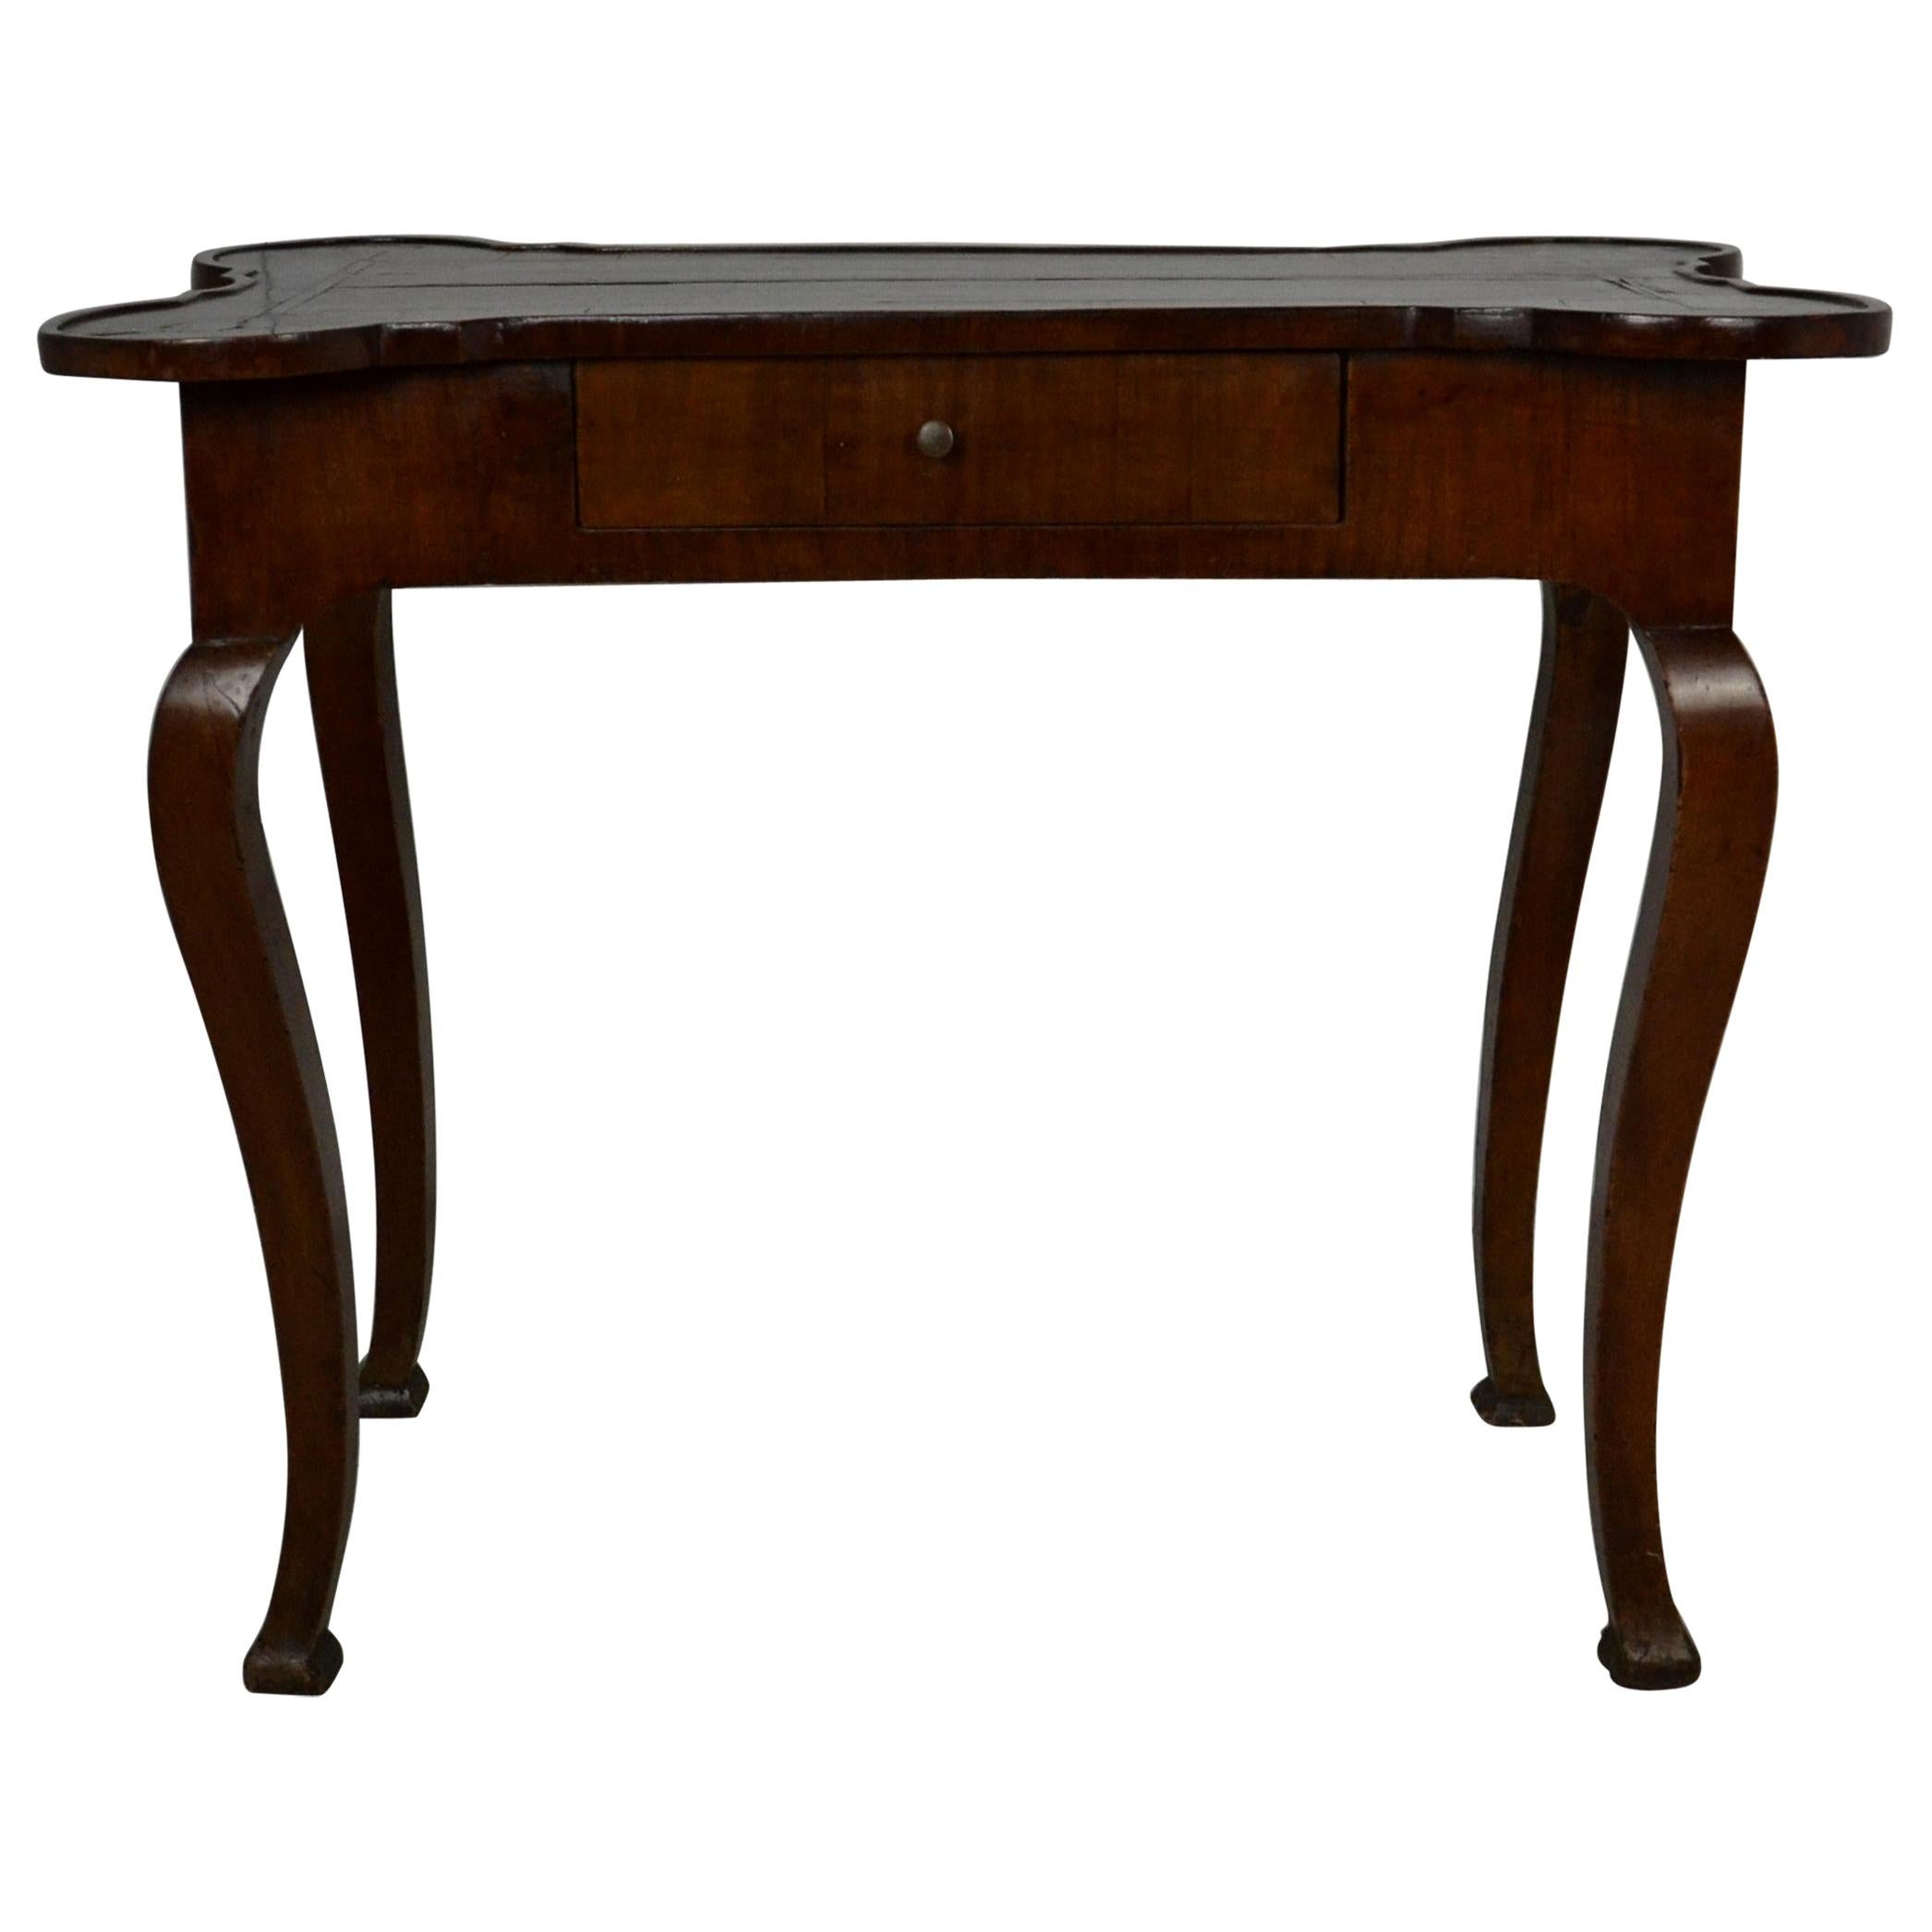 Early French Provincial Side Table with Semi-Quatrefoil Shaped Top